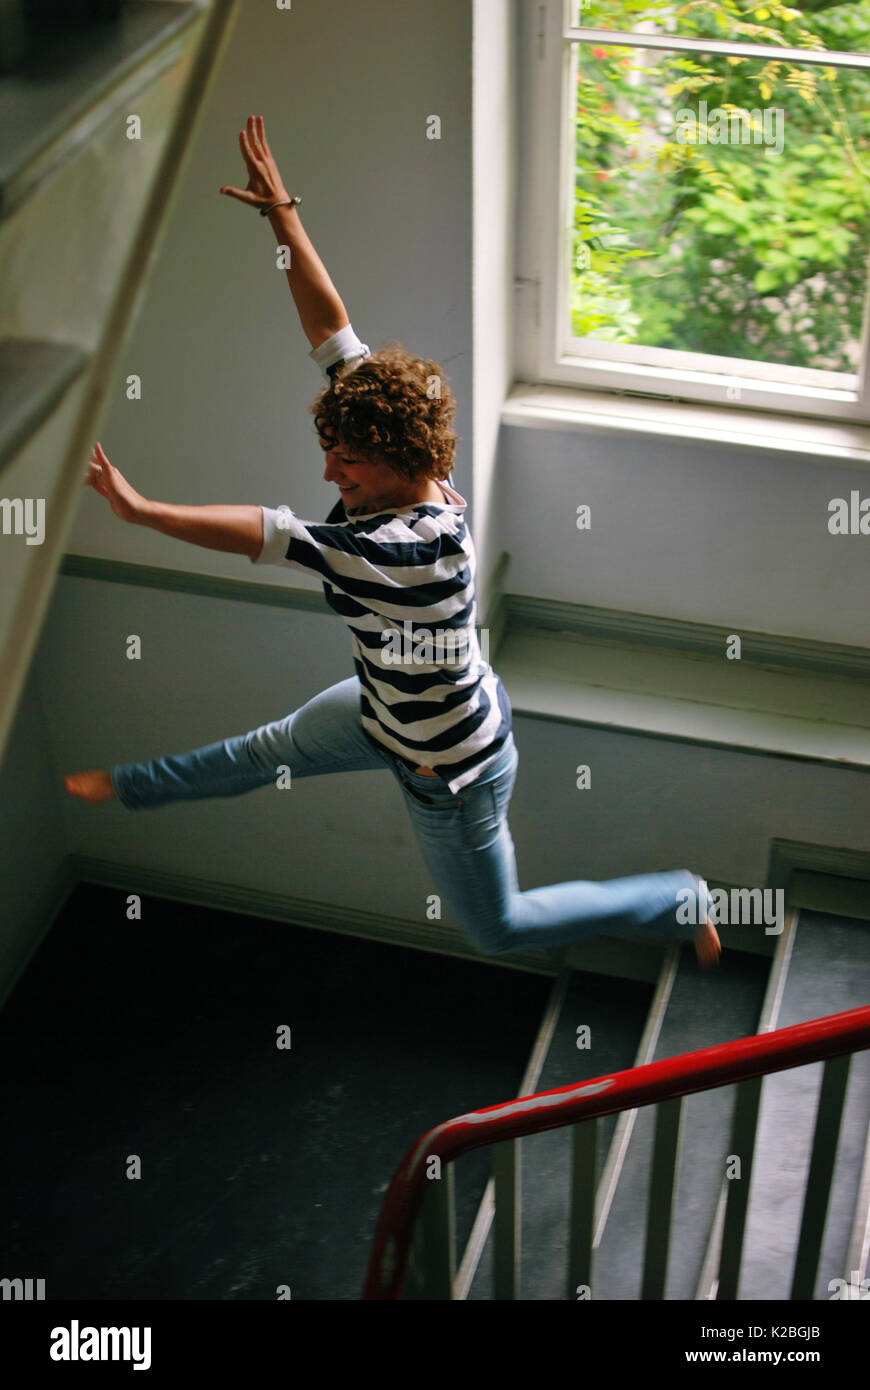 Girl doing a big jump on a staircase Stock Photo